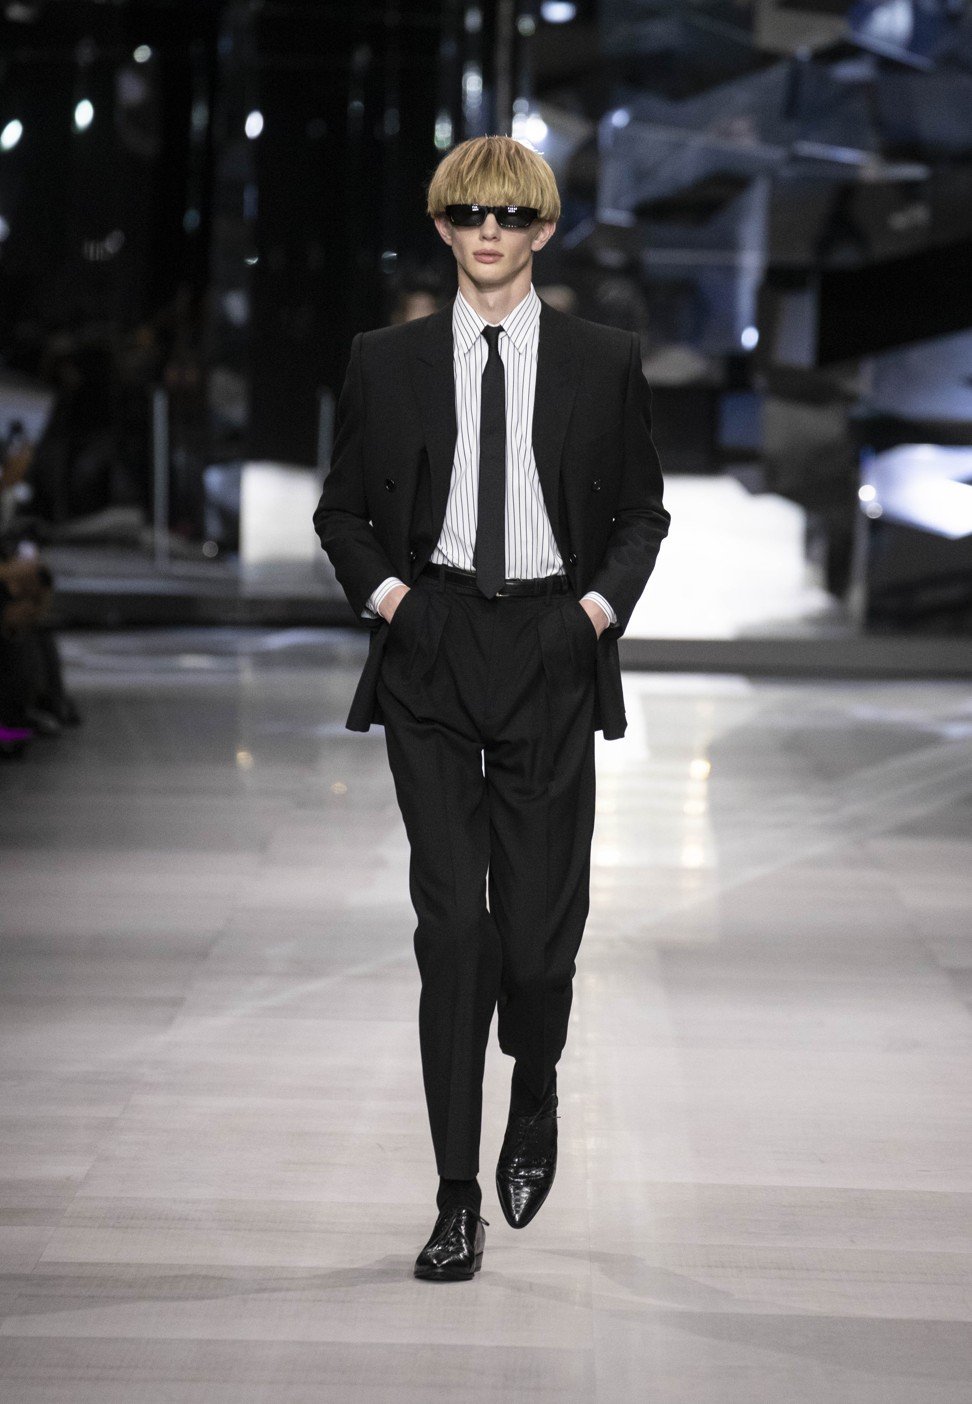 A model wears a well-tailored black suit from Celine’s menswear spring/summer 2019 collection show.